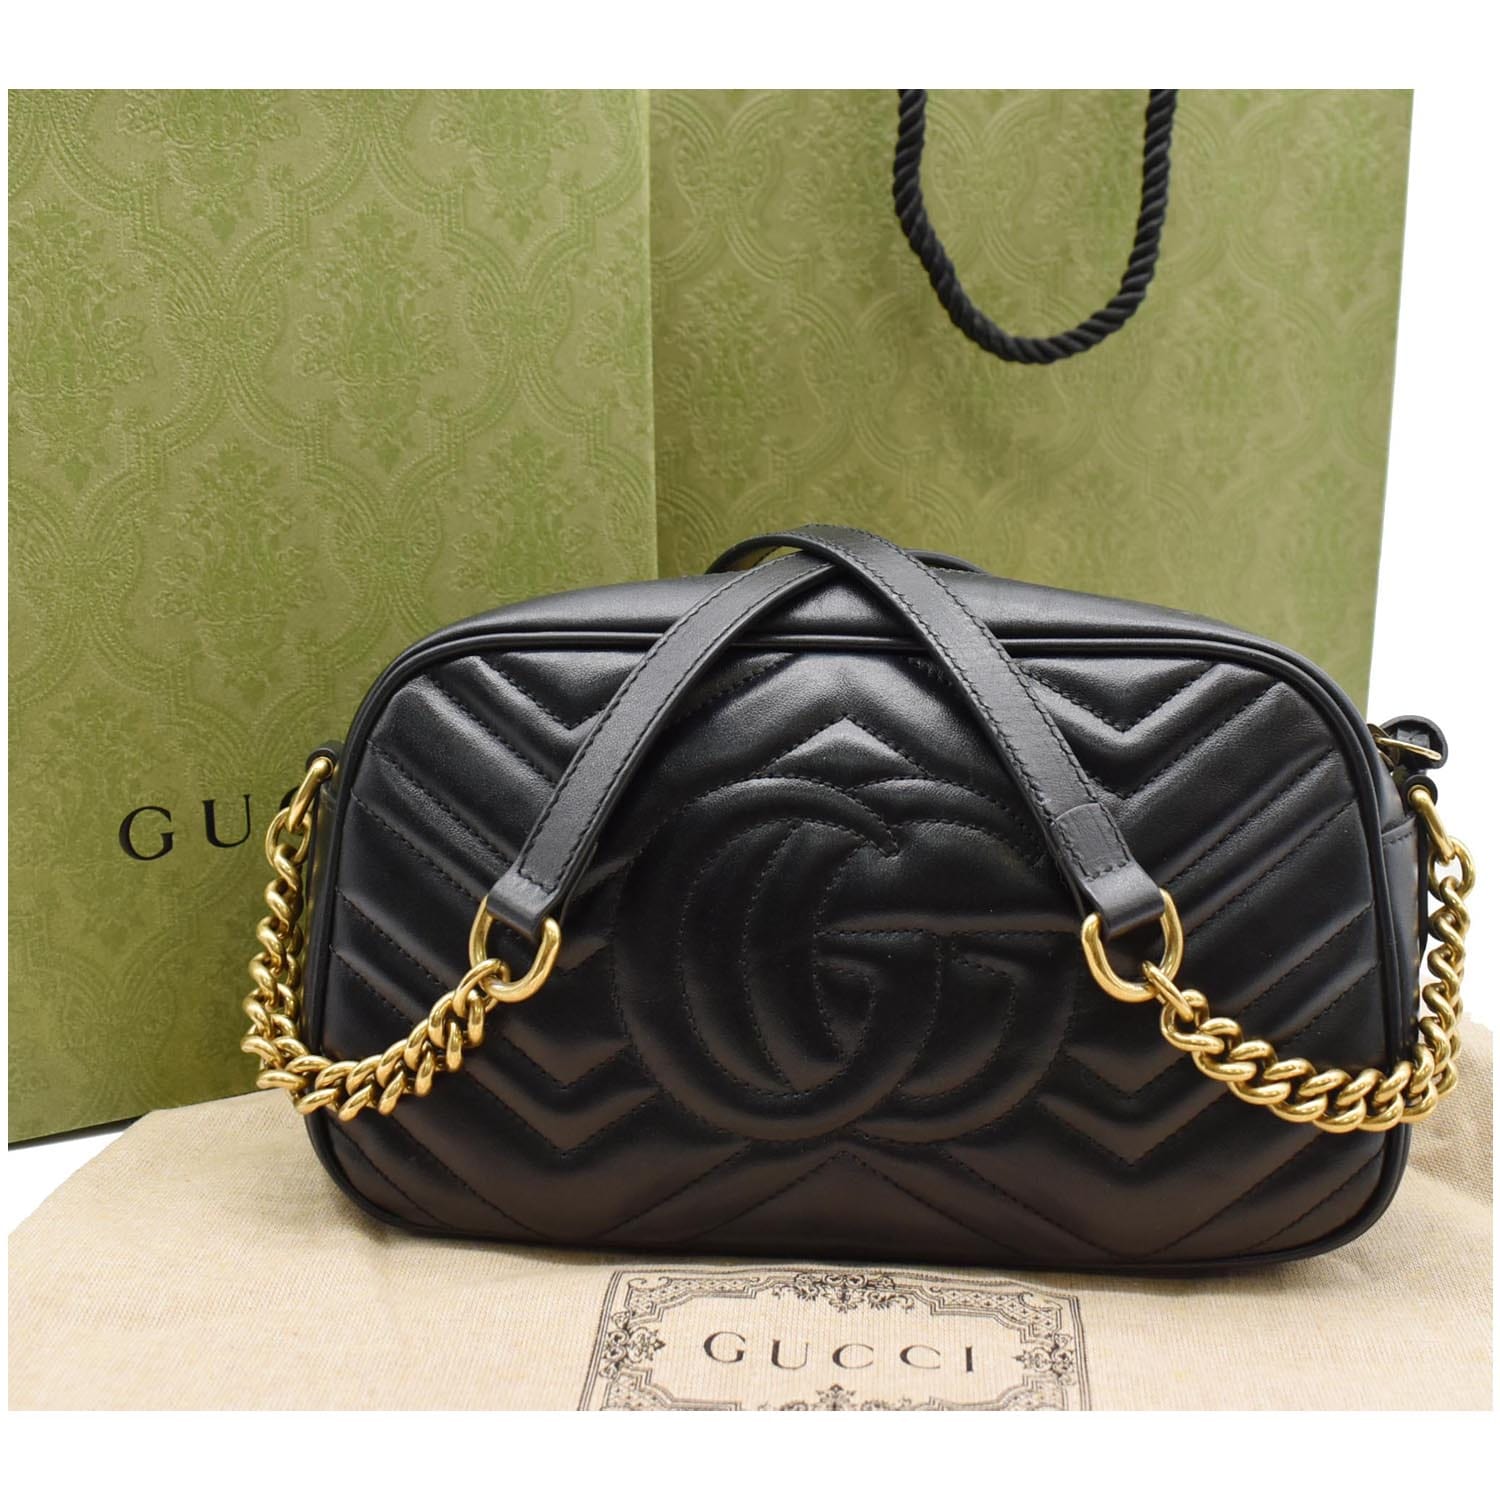 Gg marmont leather crossbody bag Gucci Black in Leather - 35606686